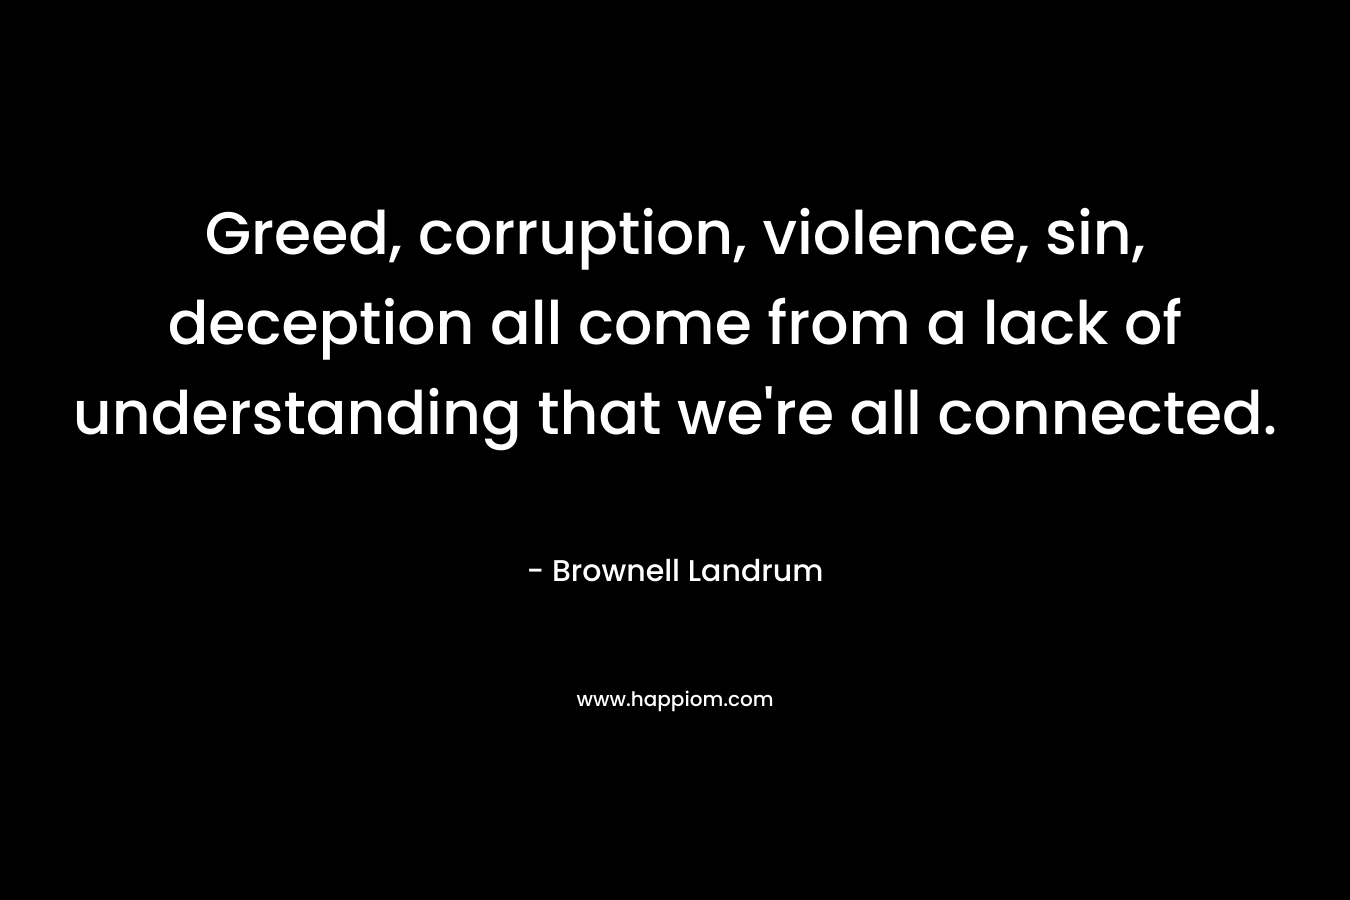 Greed, corruption, violence, sin, deception all come from a lack of understanding that we’re all connected. – Brownell Landrum